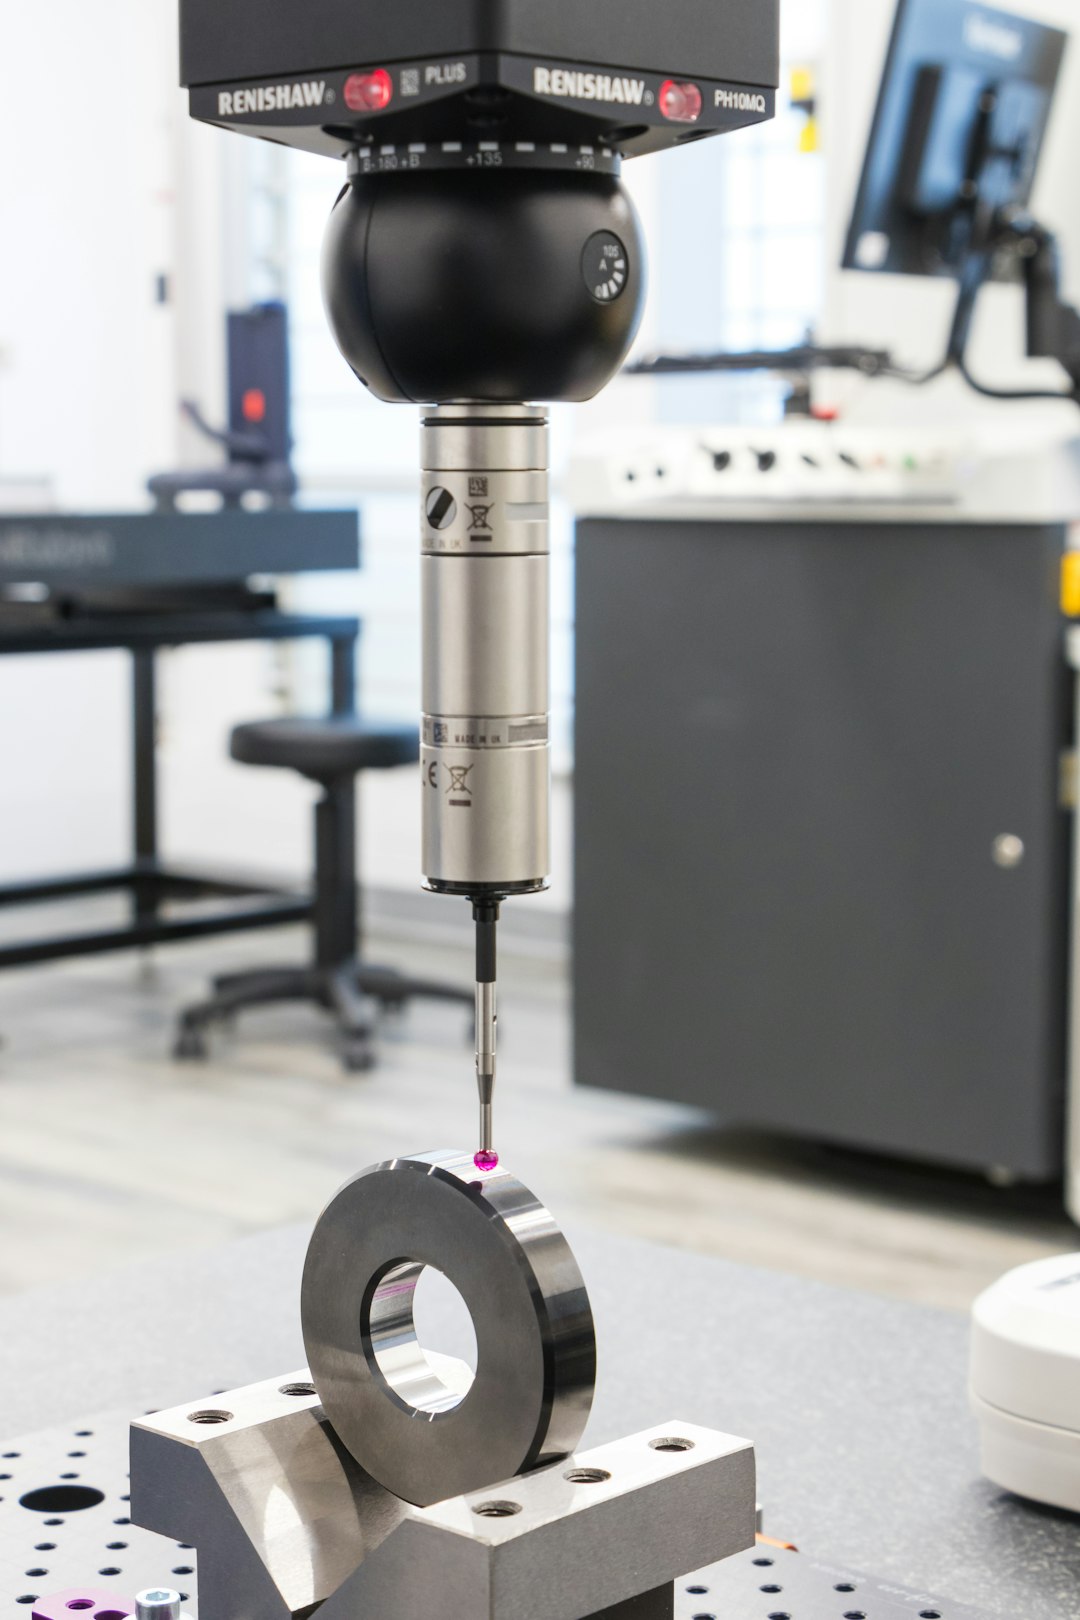 high precision inspection probe touching metal ring in clean metrology lab